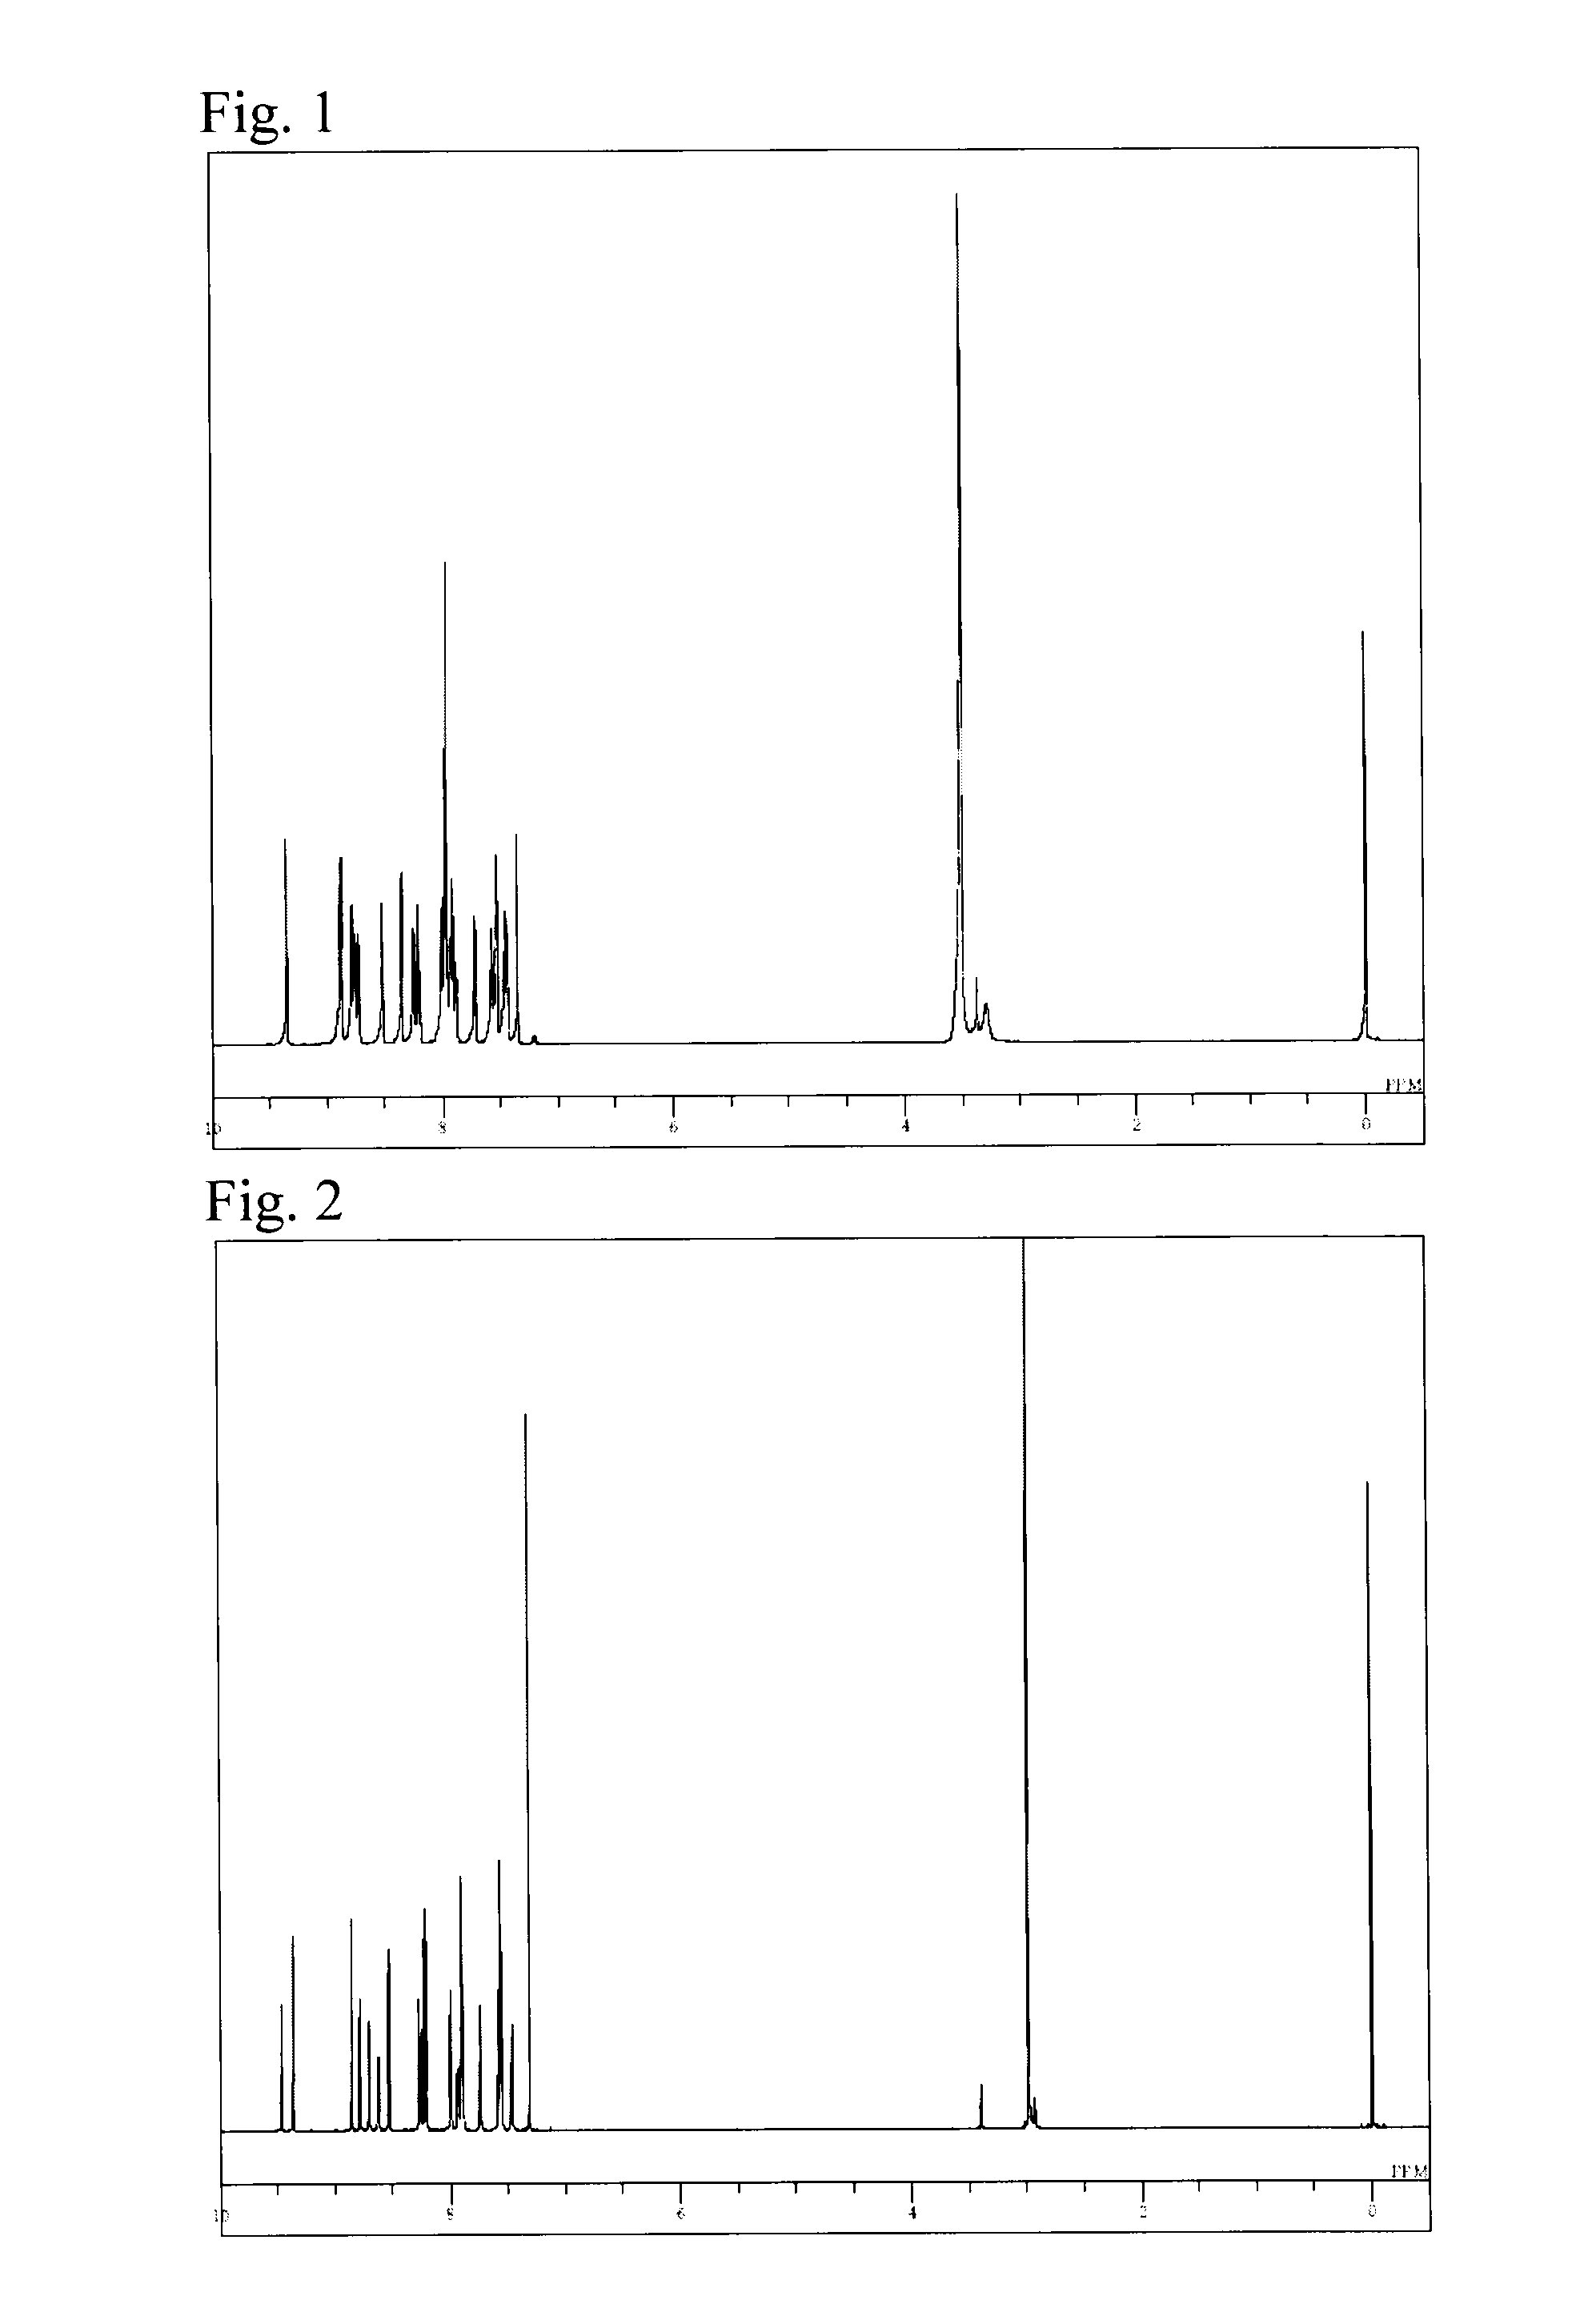 Compound having pyridoindole ring structure bonded with substituted pyridyl group, and organic electroluminescent device